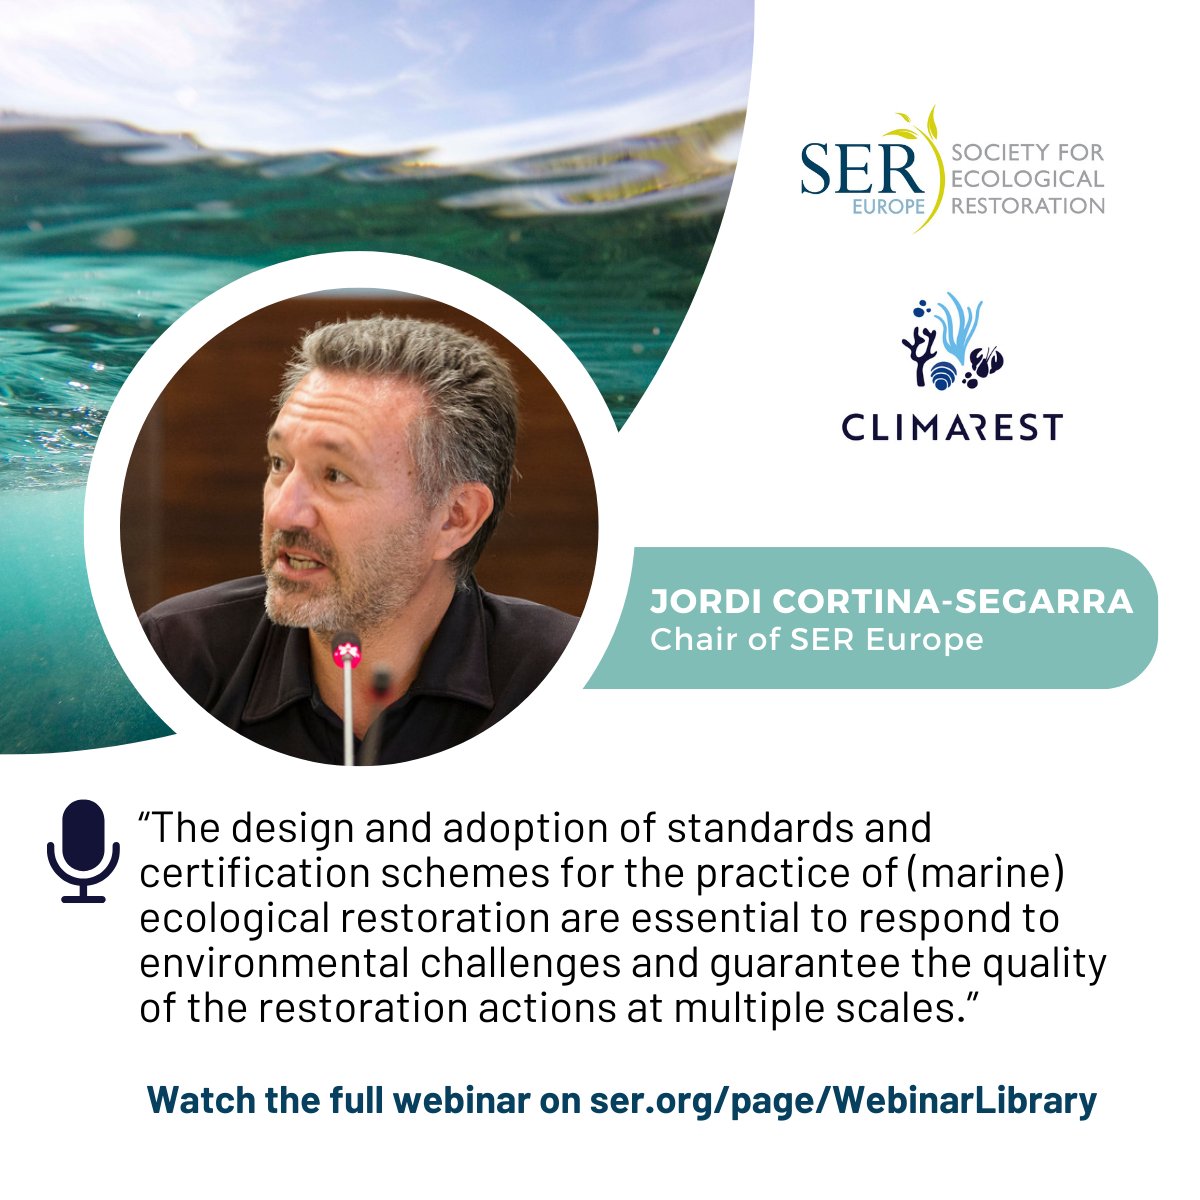 🔦 Shedding light on the #MarineRestoration Panel of the 1st #SEREurope and @climarest webinar (3/6) Meet Jordi: @UniAlicante professor, Chair of SER Europe, researching dryland ecology, soil degradation and ecosystem restoration. Watch the webinar: ser.org/news/670562/Op…